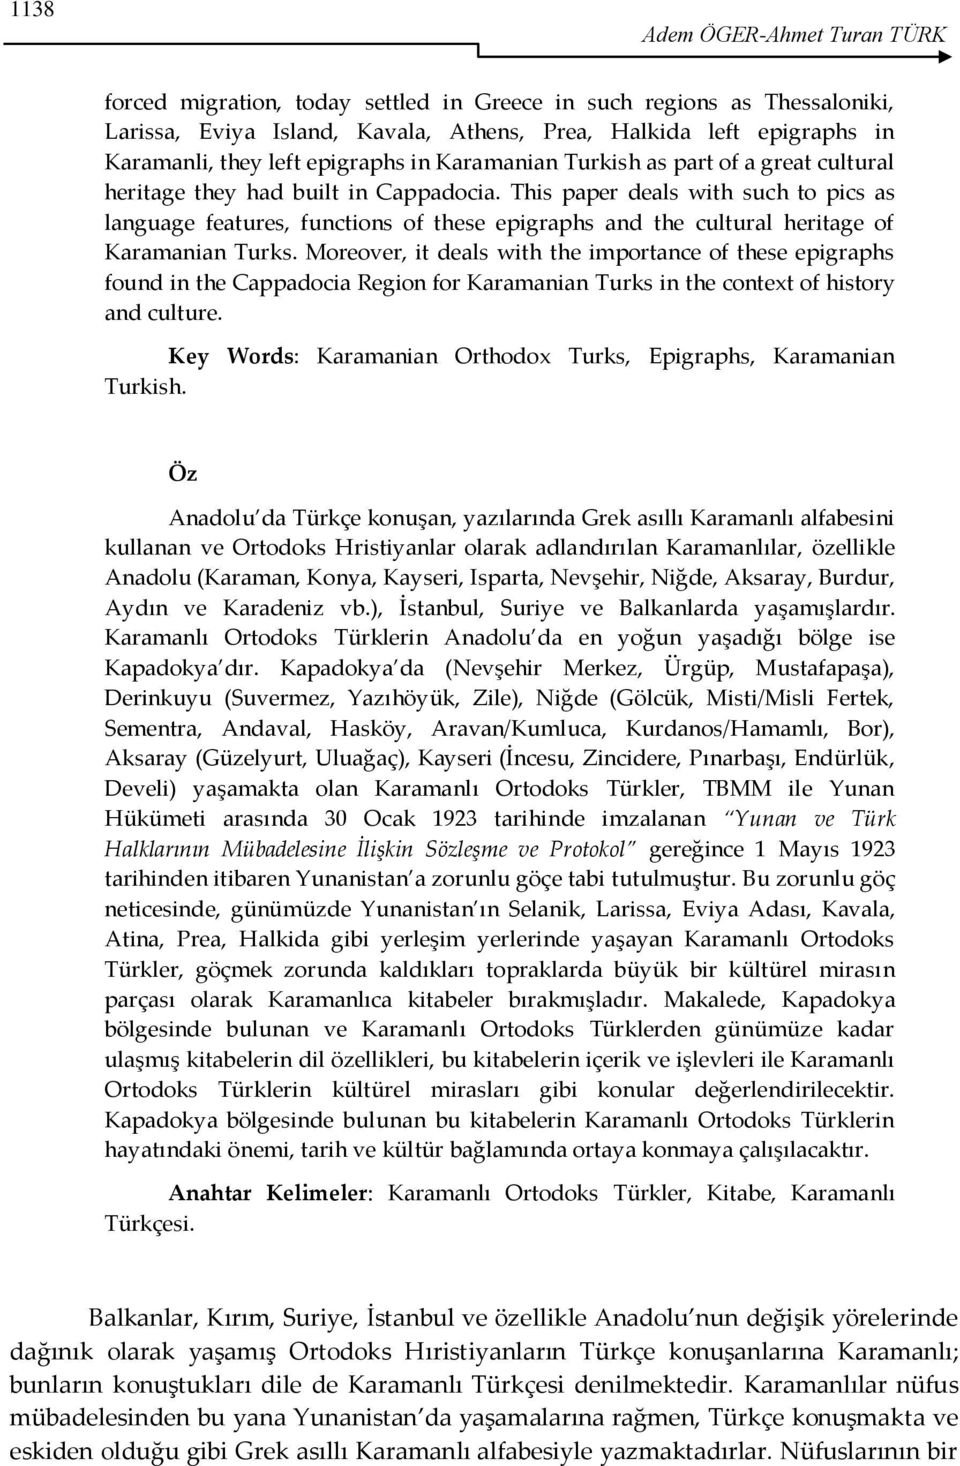 This paper deals with such to pics as language features, functions of these epigraphs and the cultural heritage of Karamanian Turks.